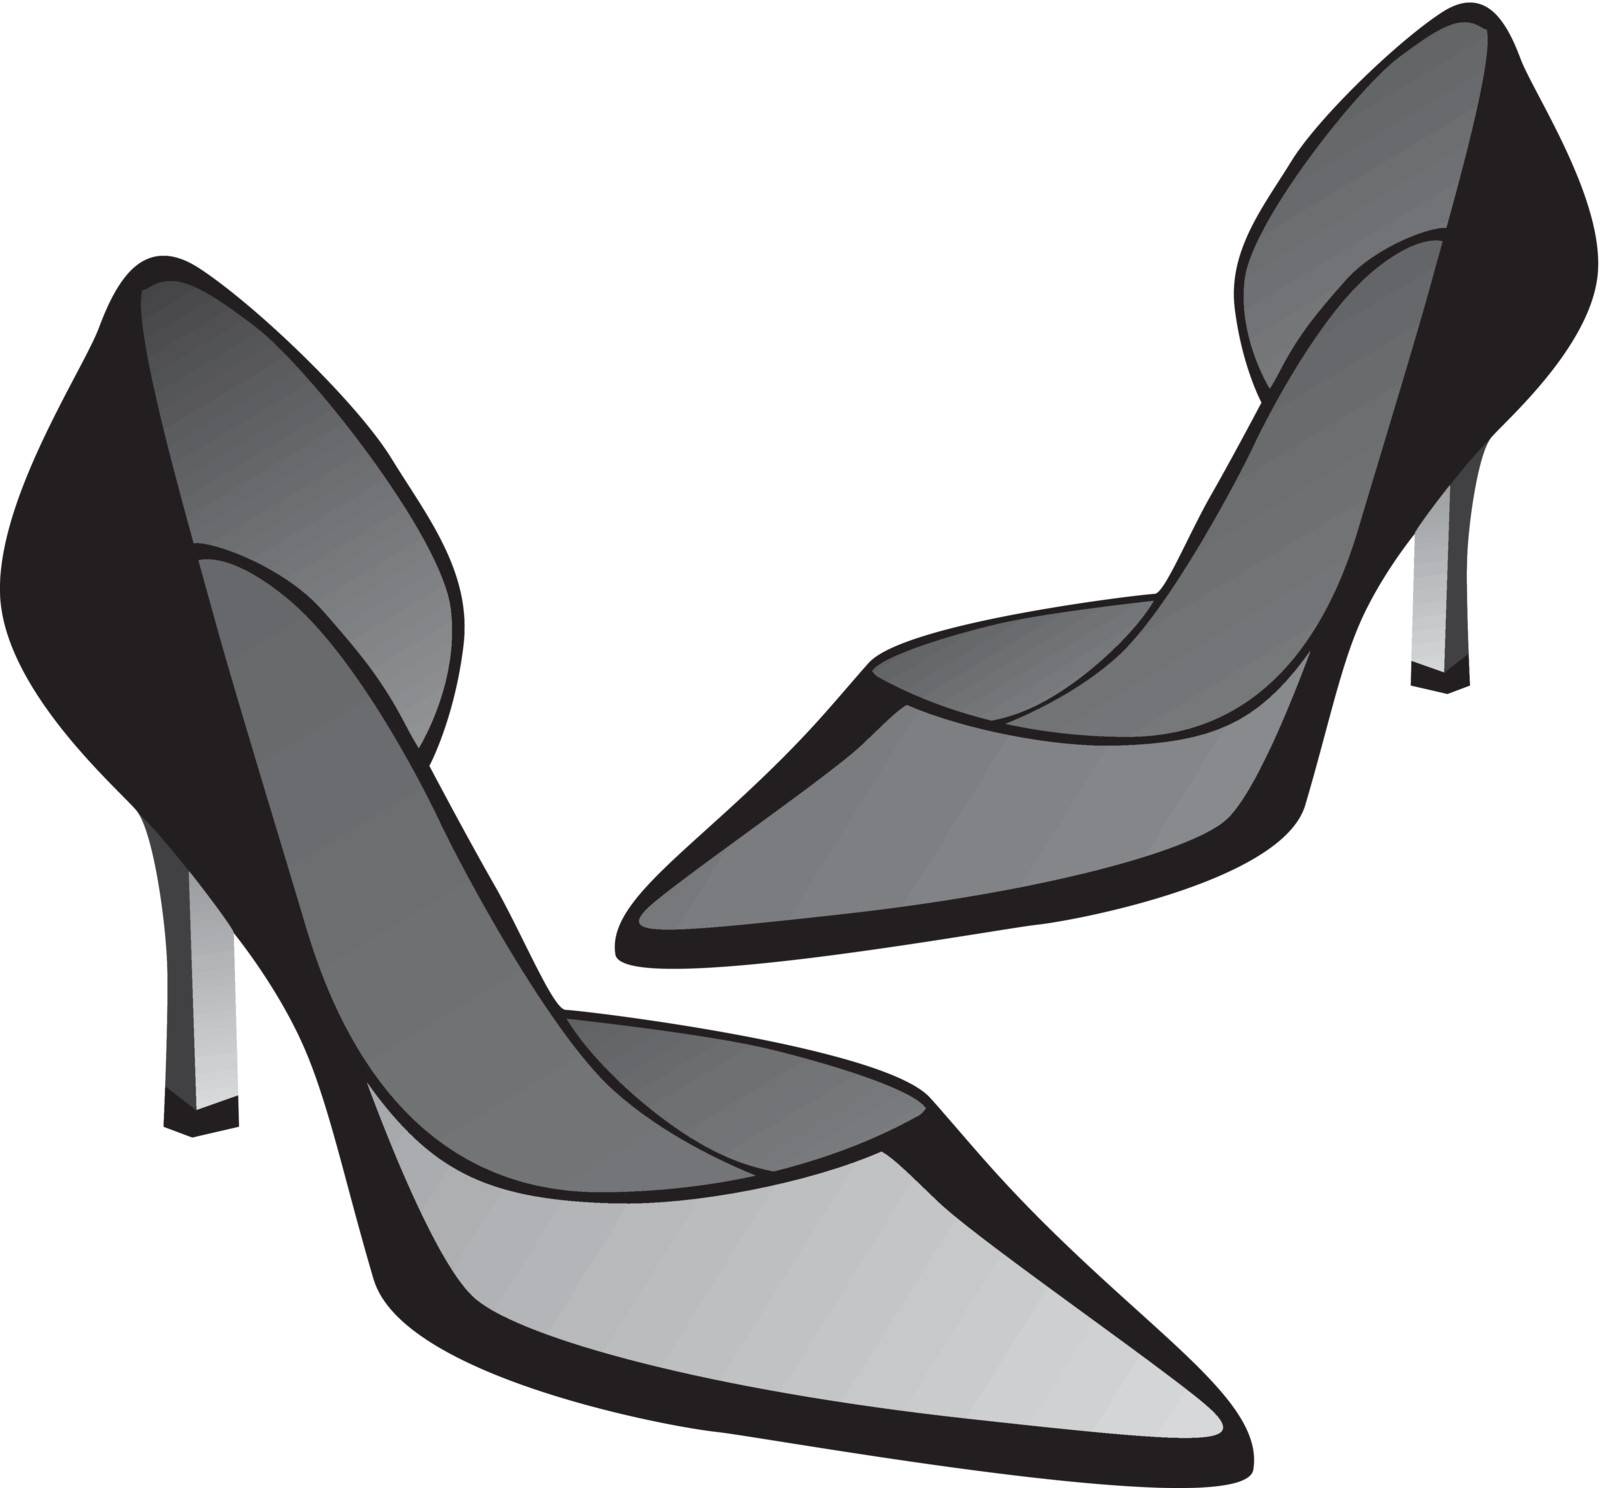 fully editable vector illustration of high heel pair of shoes